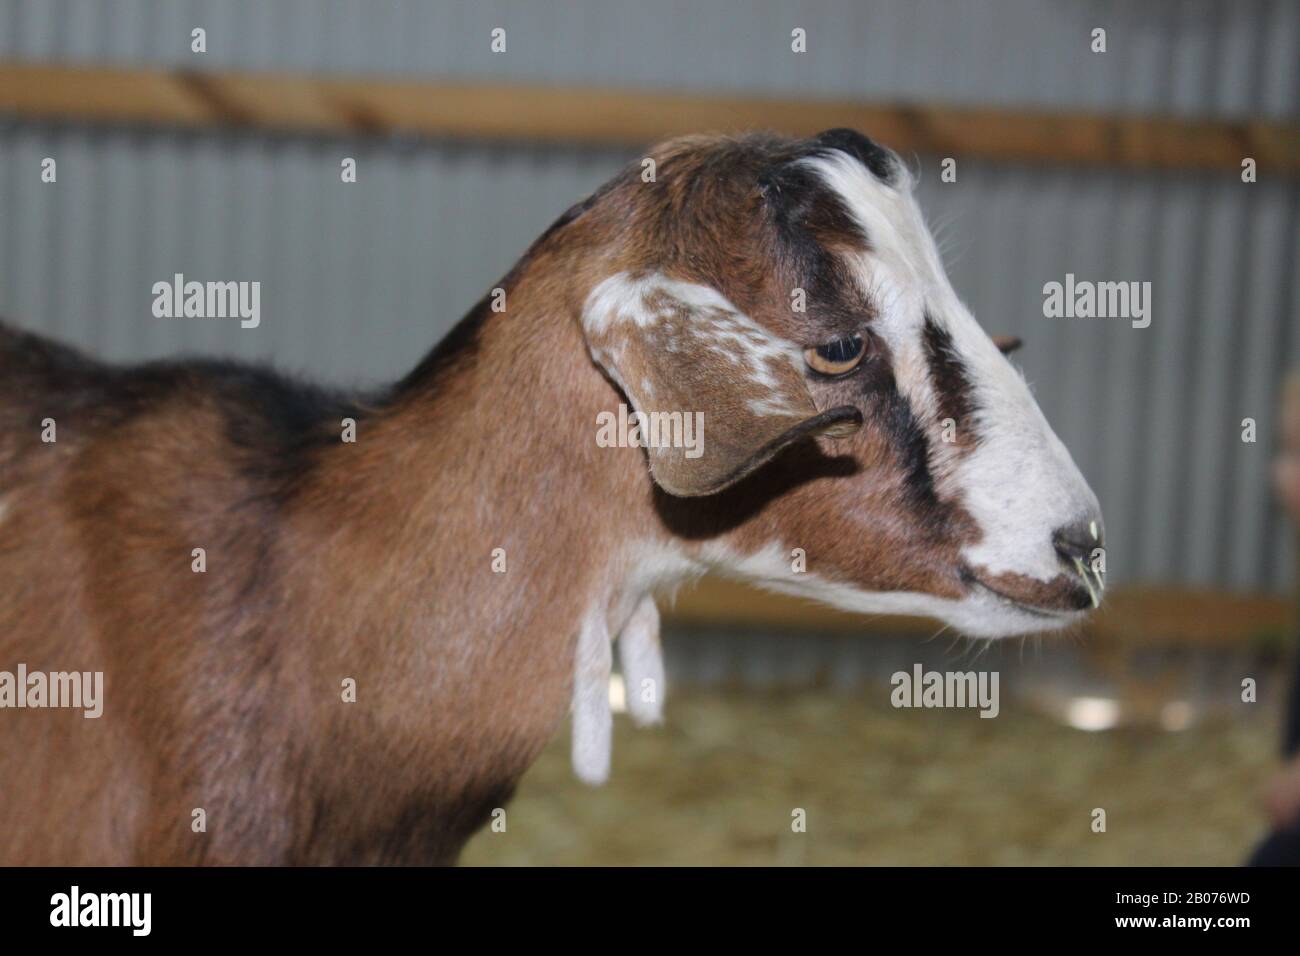 Dairy goat with wattles Stock Photo